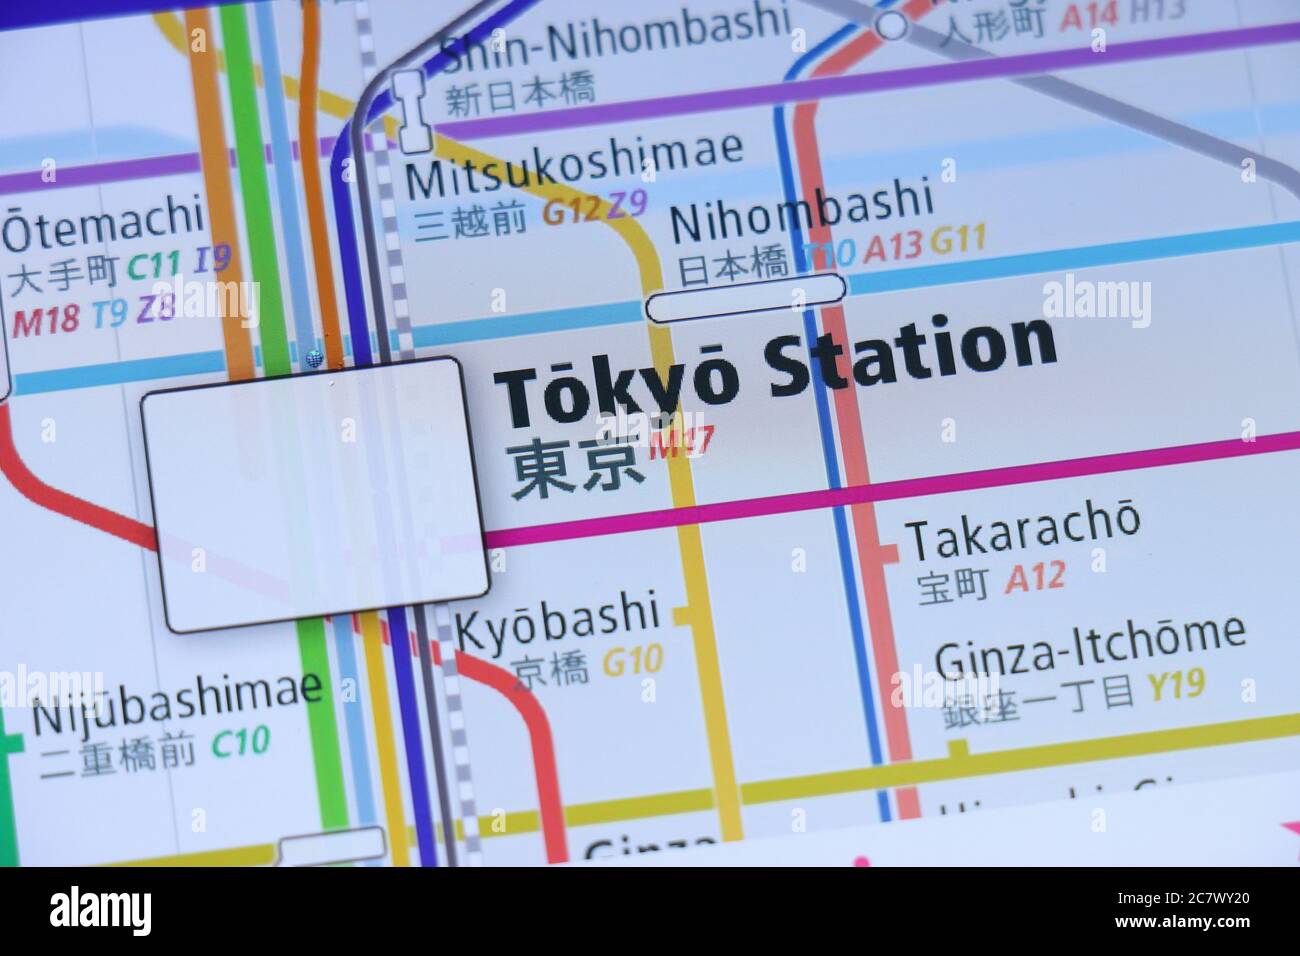 Tokyo Station on Tokyo subway map on smartphone screen. Stock Photo